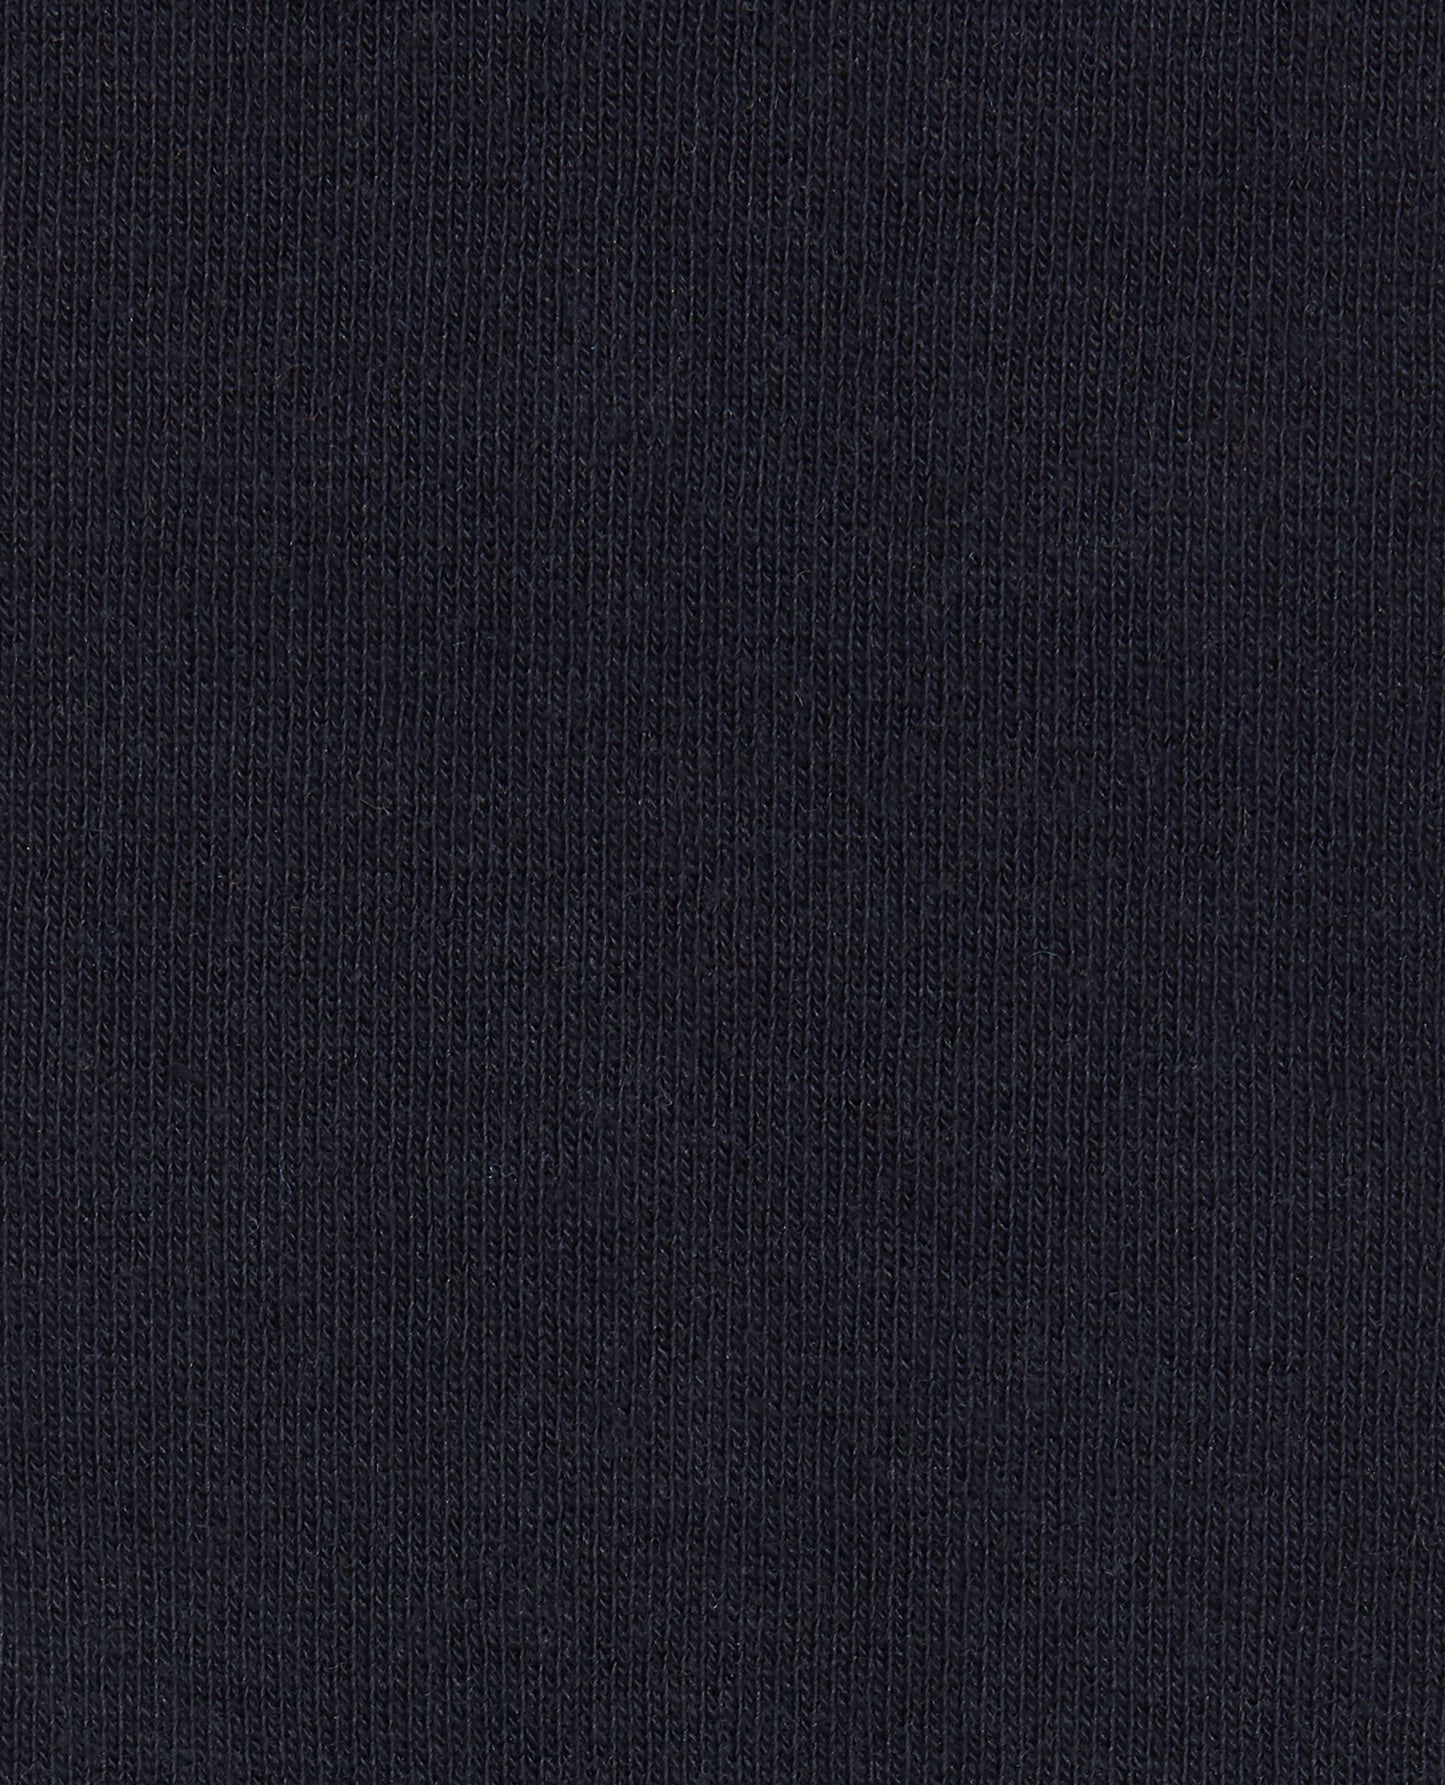 Image 2 of Navy Contrast Heel and Toe 5 Pack Sock Set